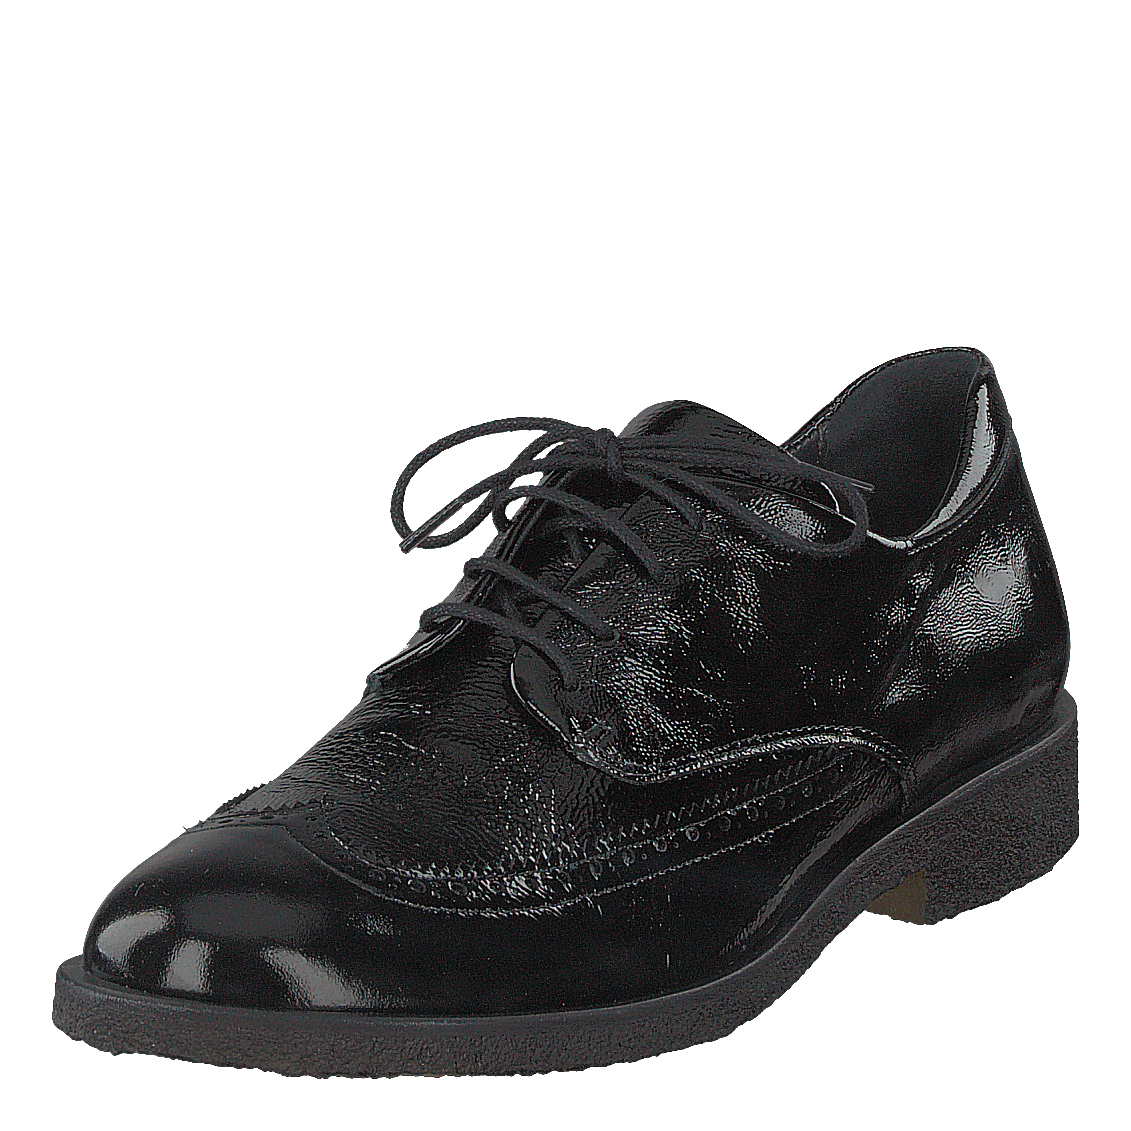 Brogues W. Cap-toe And Laces Black Patent